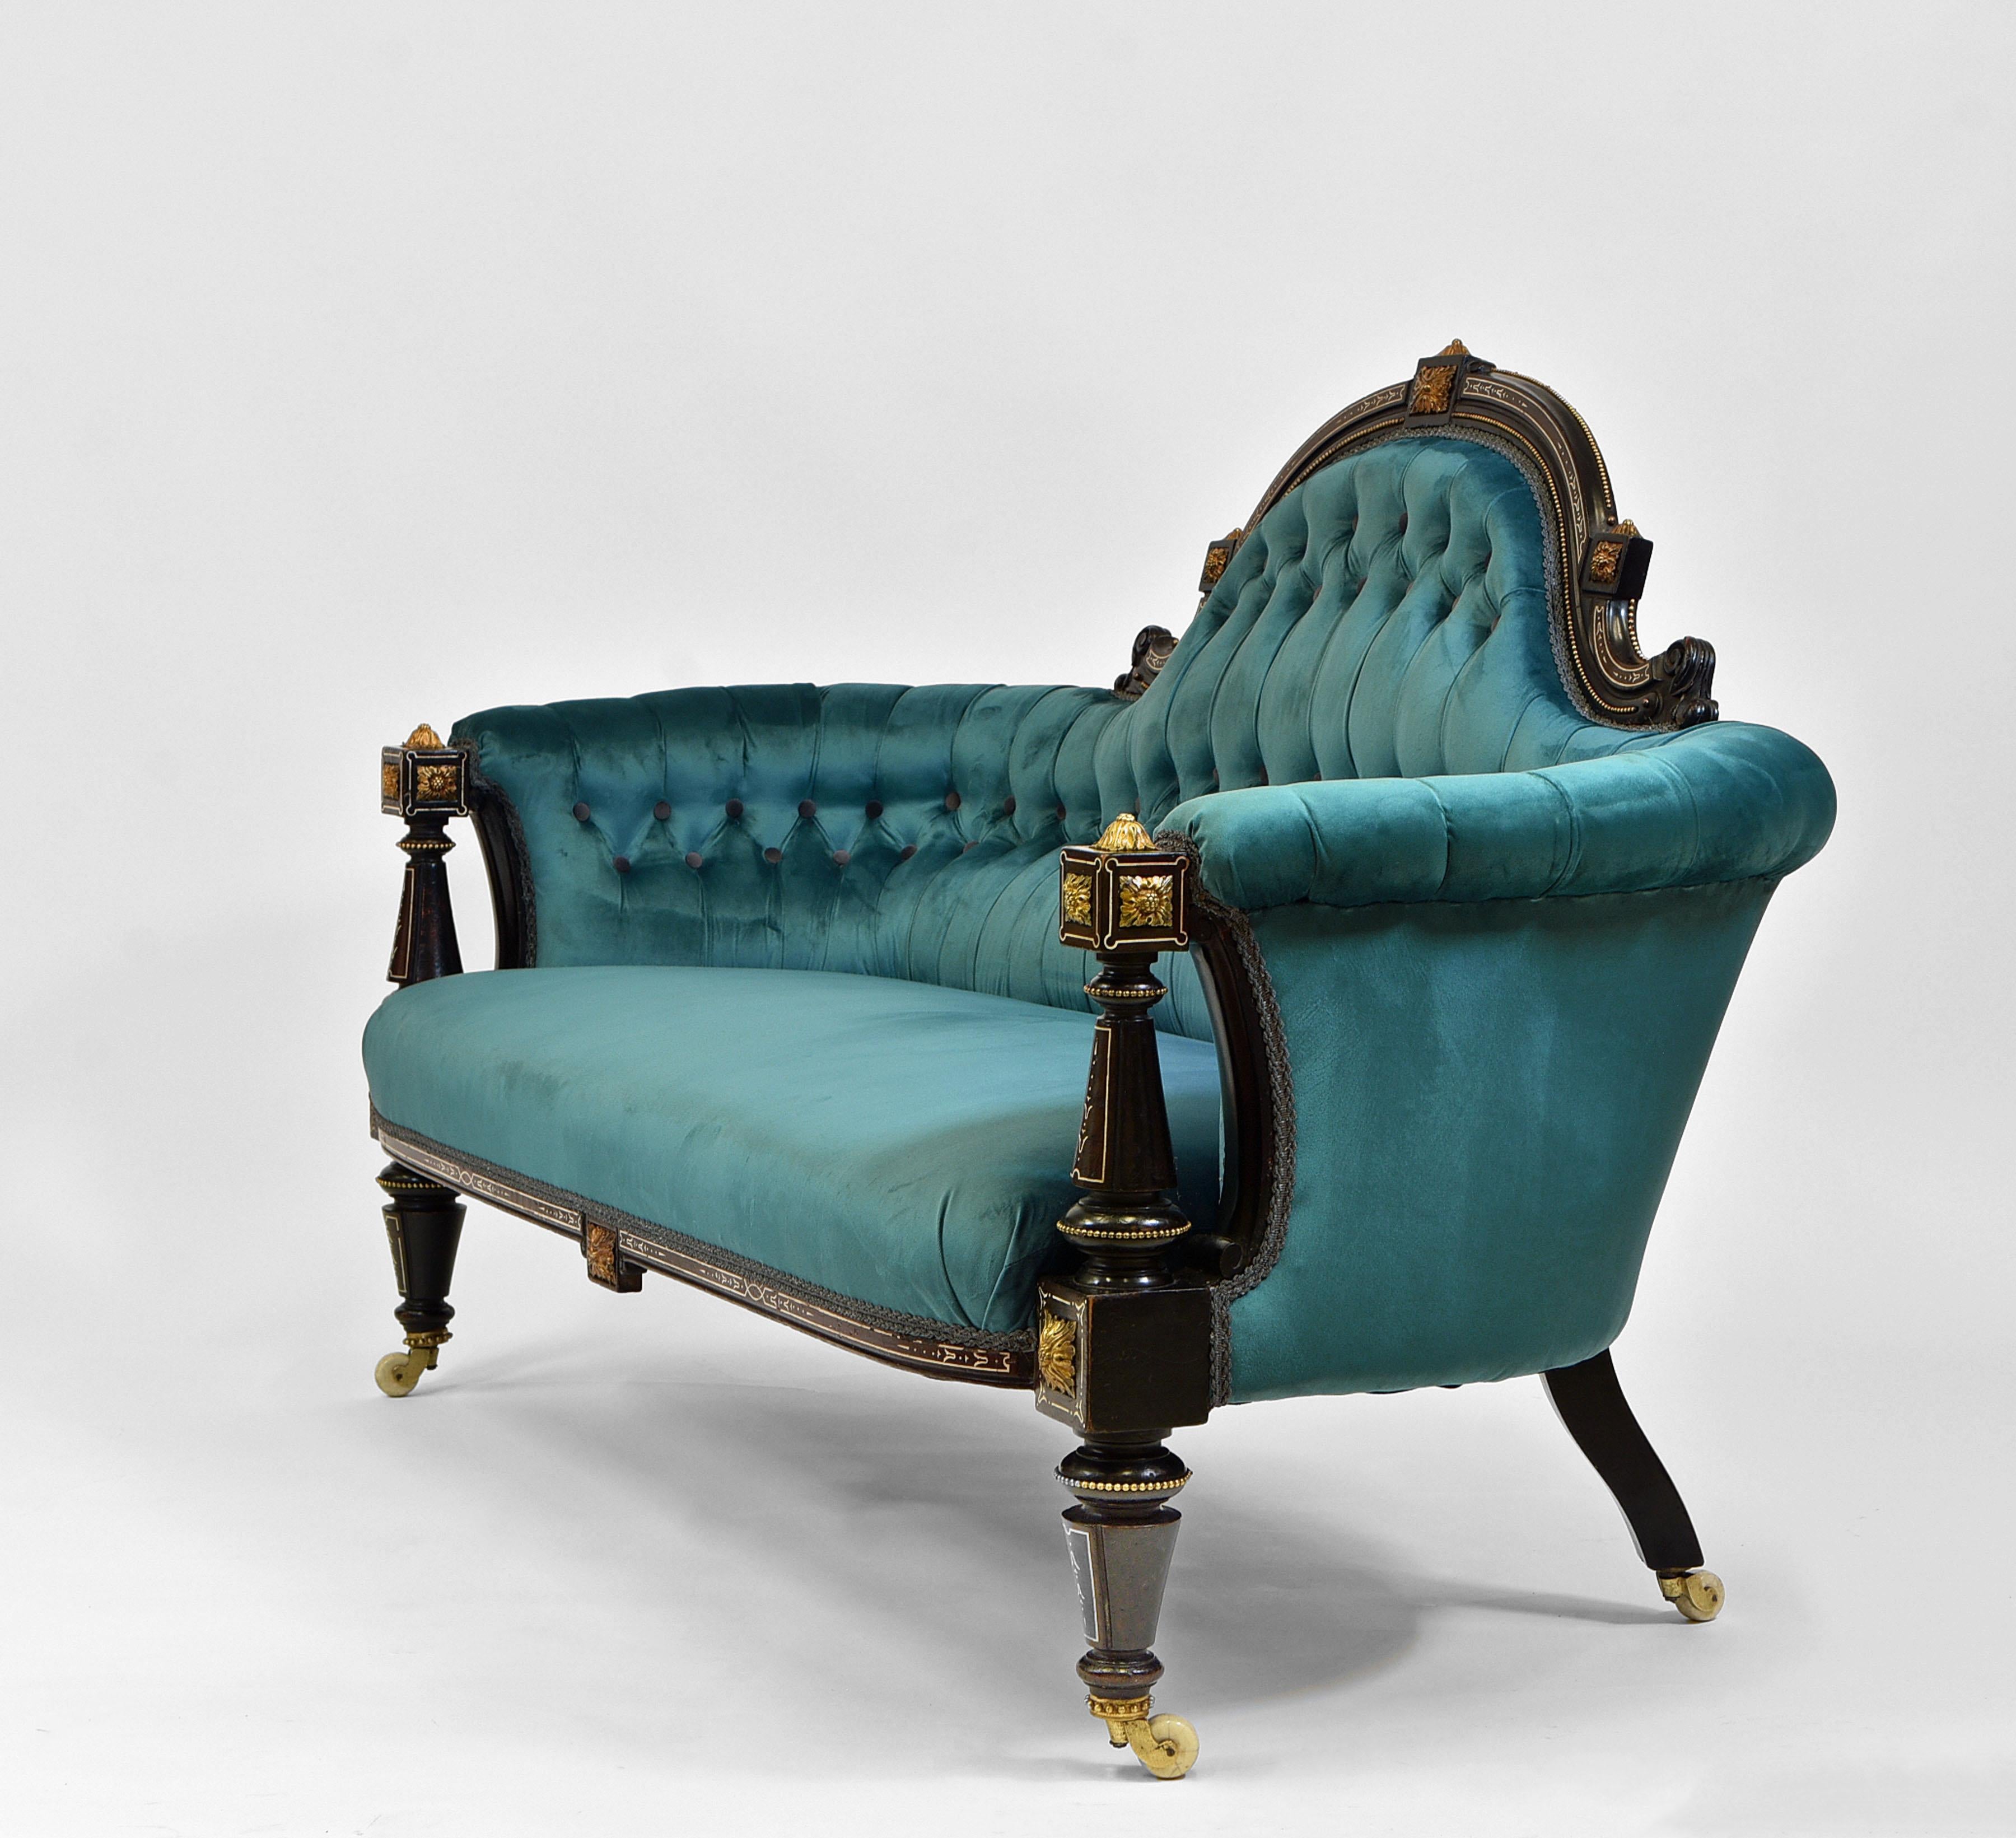 A fabulous English mid-19th century ebonised and gilt bronzed mounted, button backed velvet sofa. Circa 1860.

The sofa has been fully re-sprung, reupholstered and covered in Designer's Guild teal velvet, with contrasting charcoal velvet buttons to